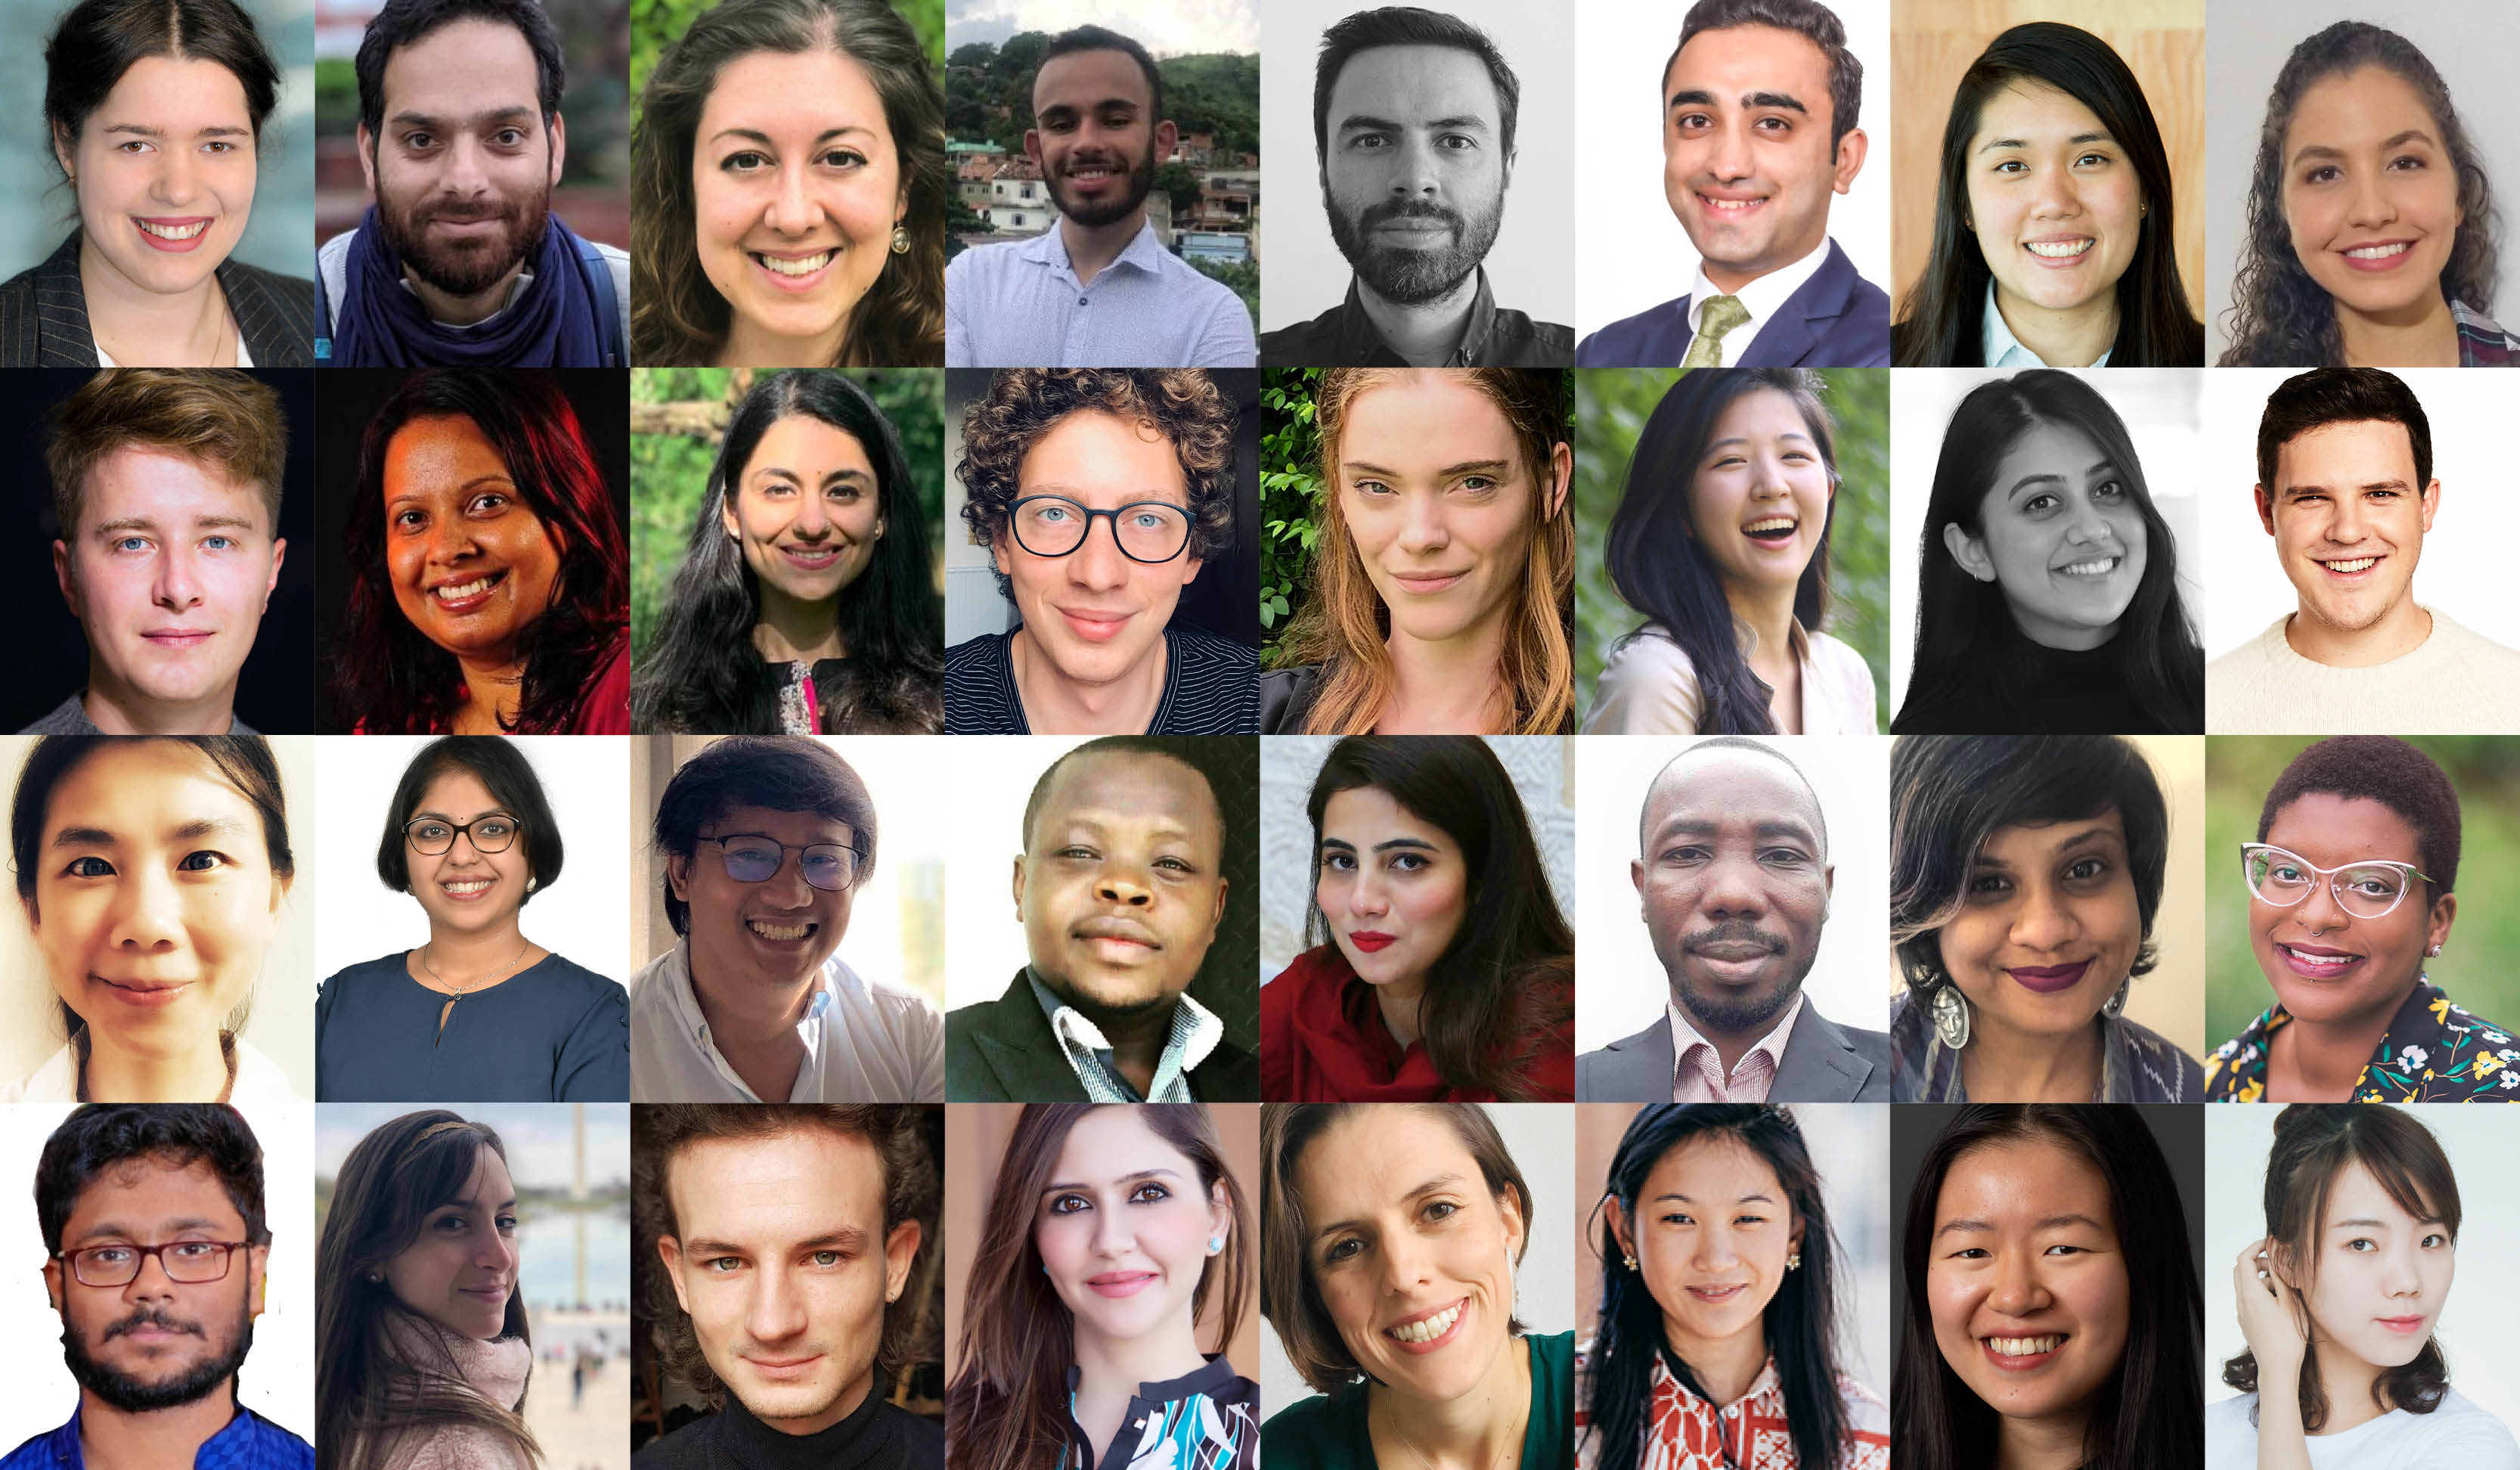 A collage of portraits of the Research Spring Participants